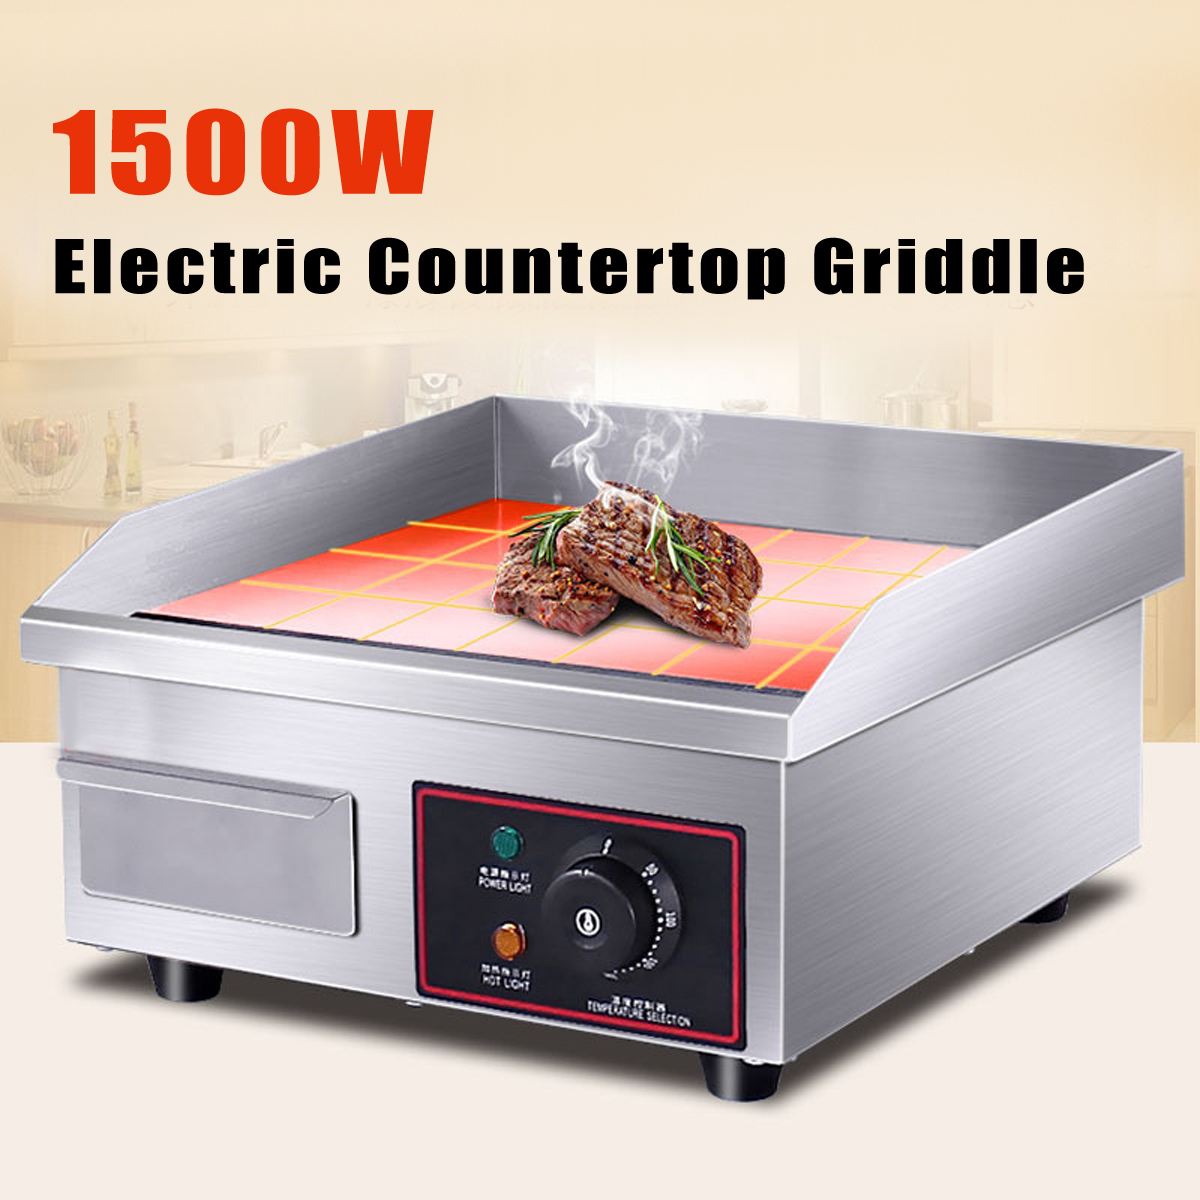 1500W-110V-Electric-Countertop-Griddle-Commercial-Restaurant-Flat-Top-Grill-BBQ-1334353-2